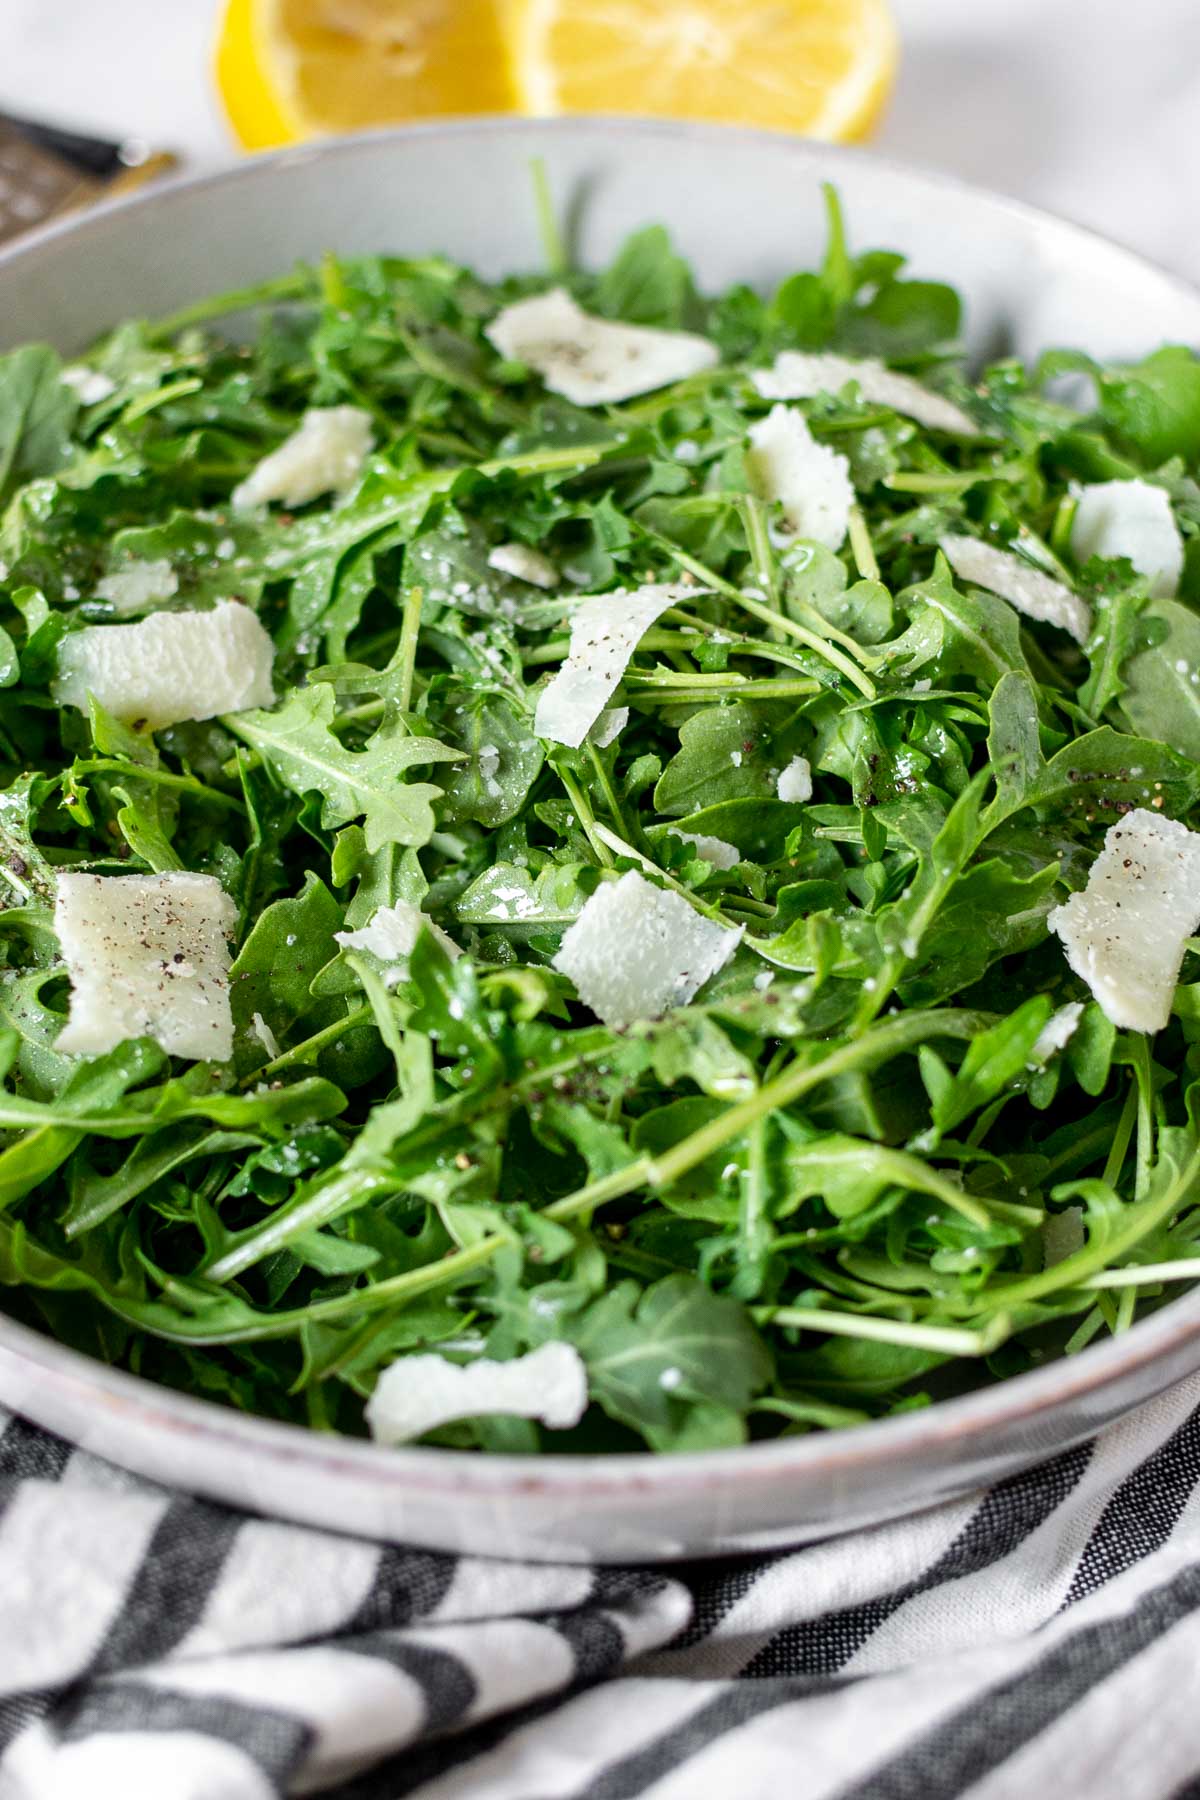 Close up to show texture of arugula salad with parmesan shavings and black pepper.